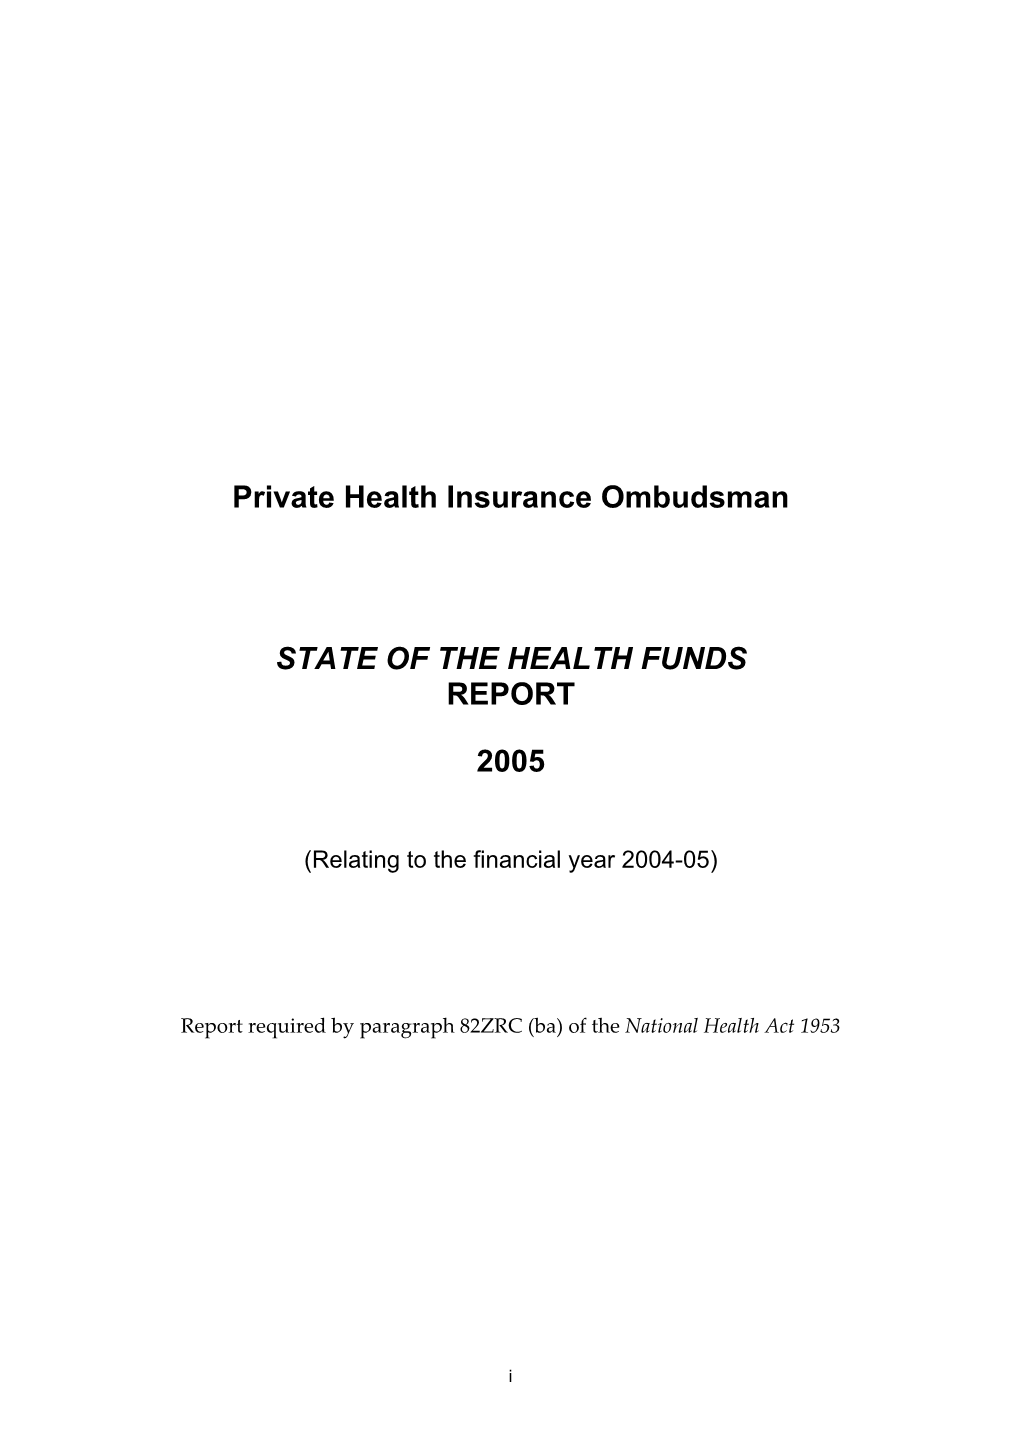 2005 State of the Health Funds Report